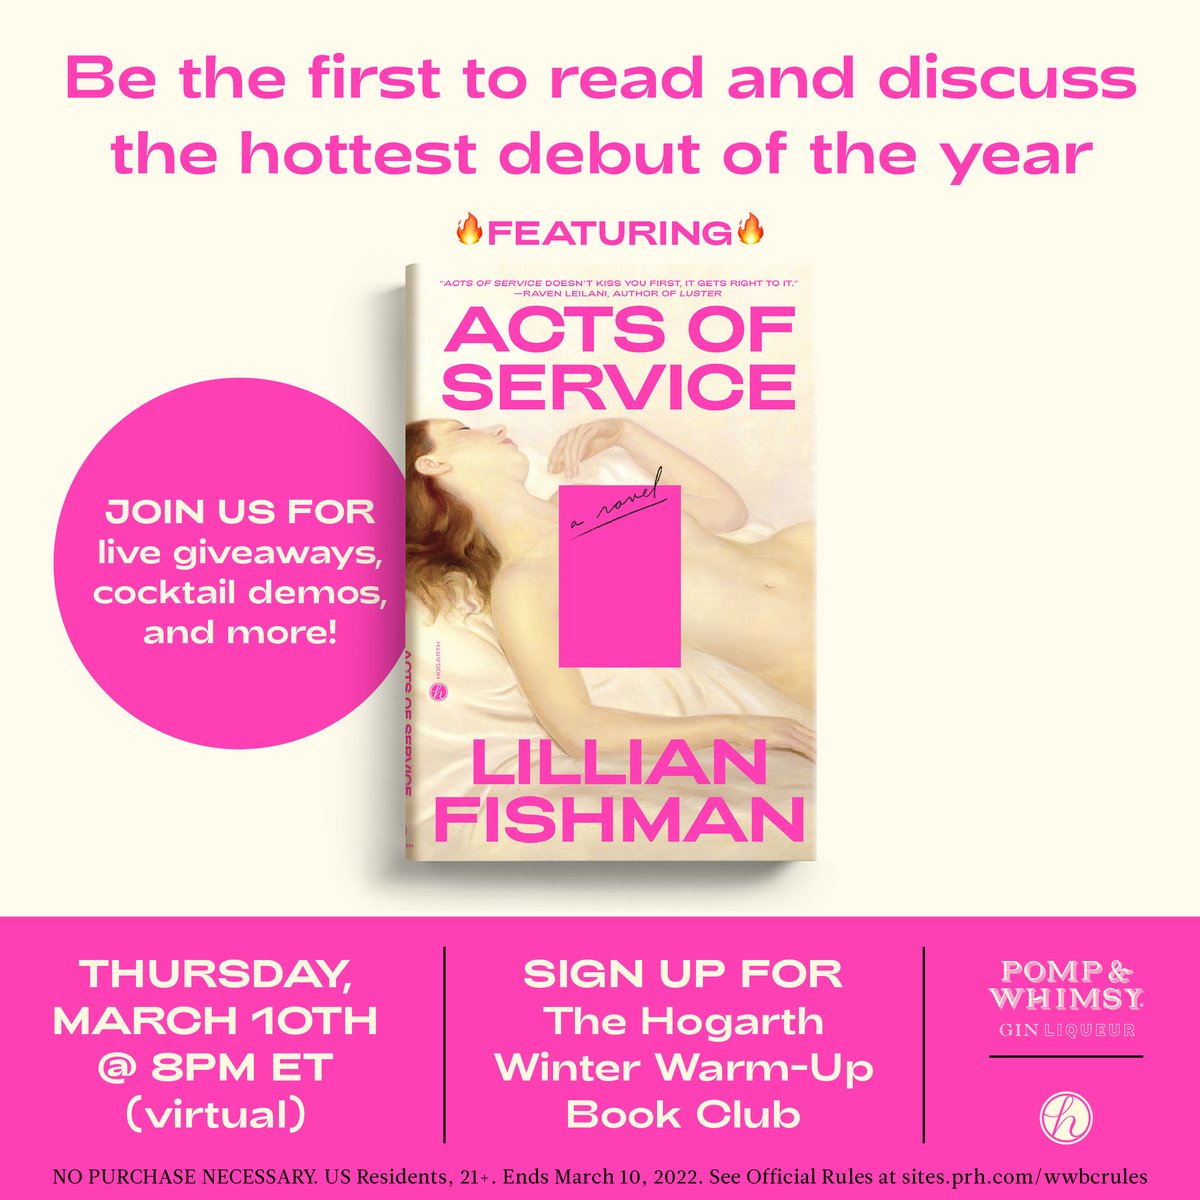 Join @HogarthBooks and @pompandwhimsy for a special pre-pub virtual book club on 3/10 and be the first to read ACTS OF SERVICE, the provocative debut novel that will change the way you think about sex and desire. Space is limited. Sign up today! eventbrite.com/e/hogarth-wint…